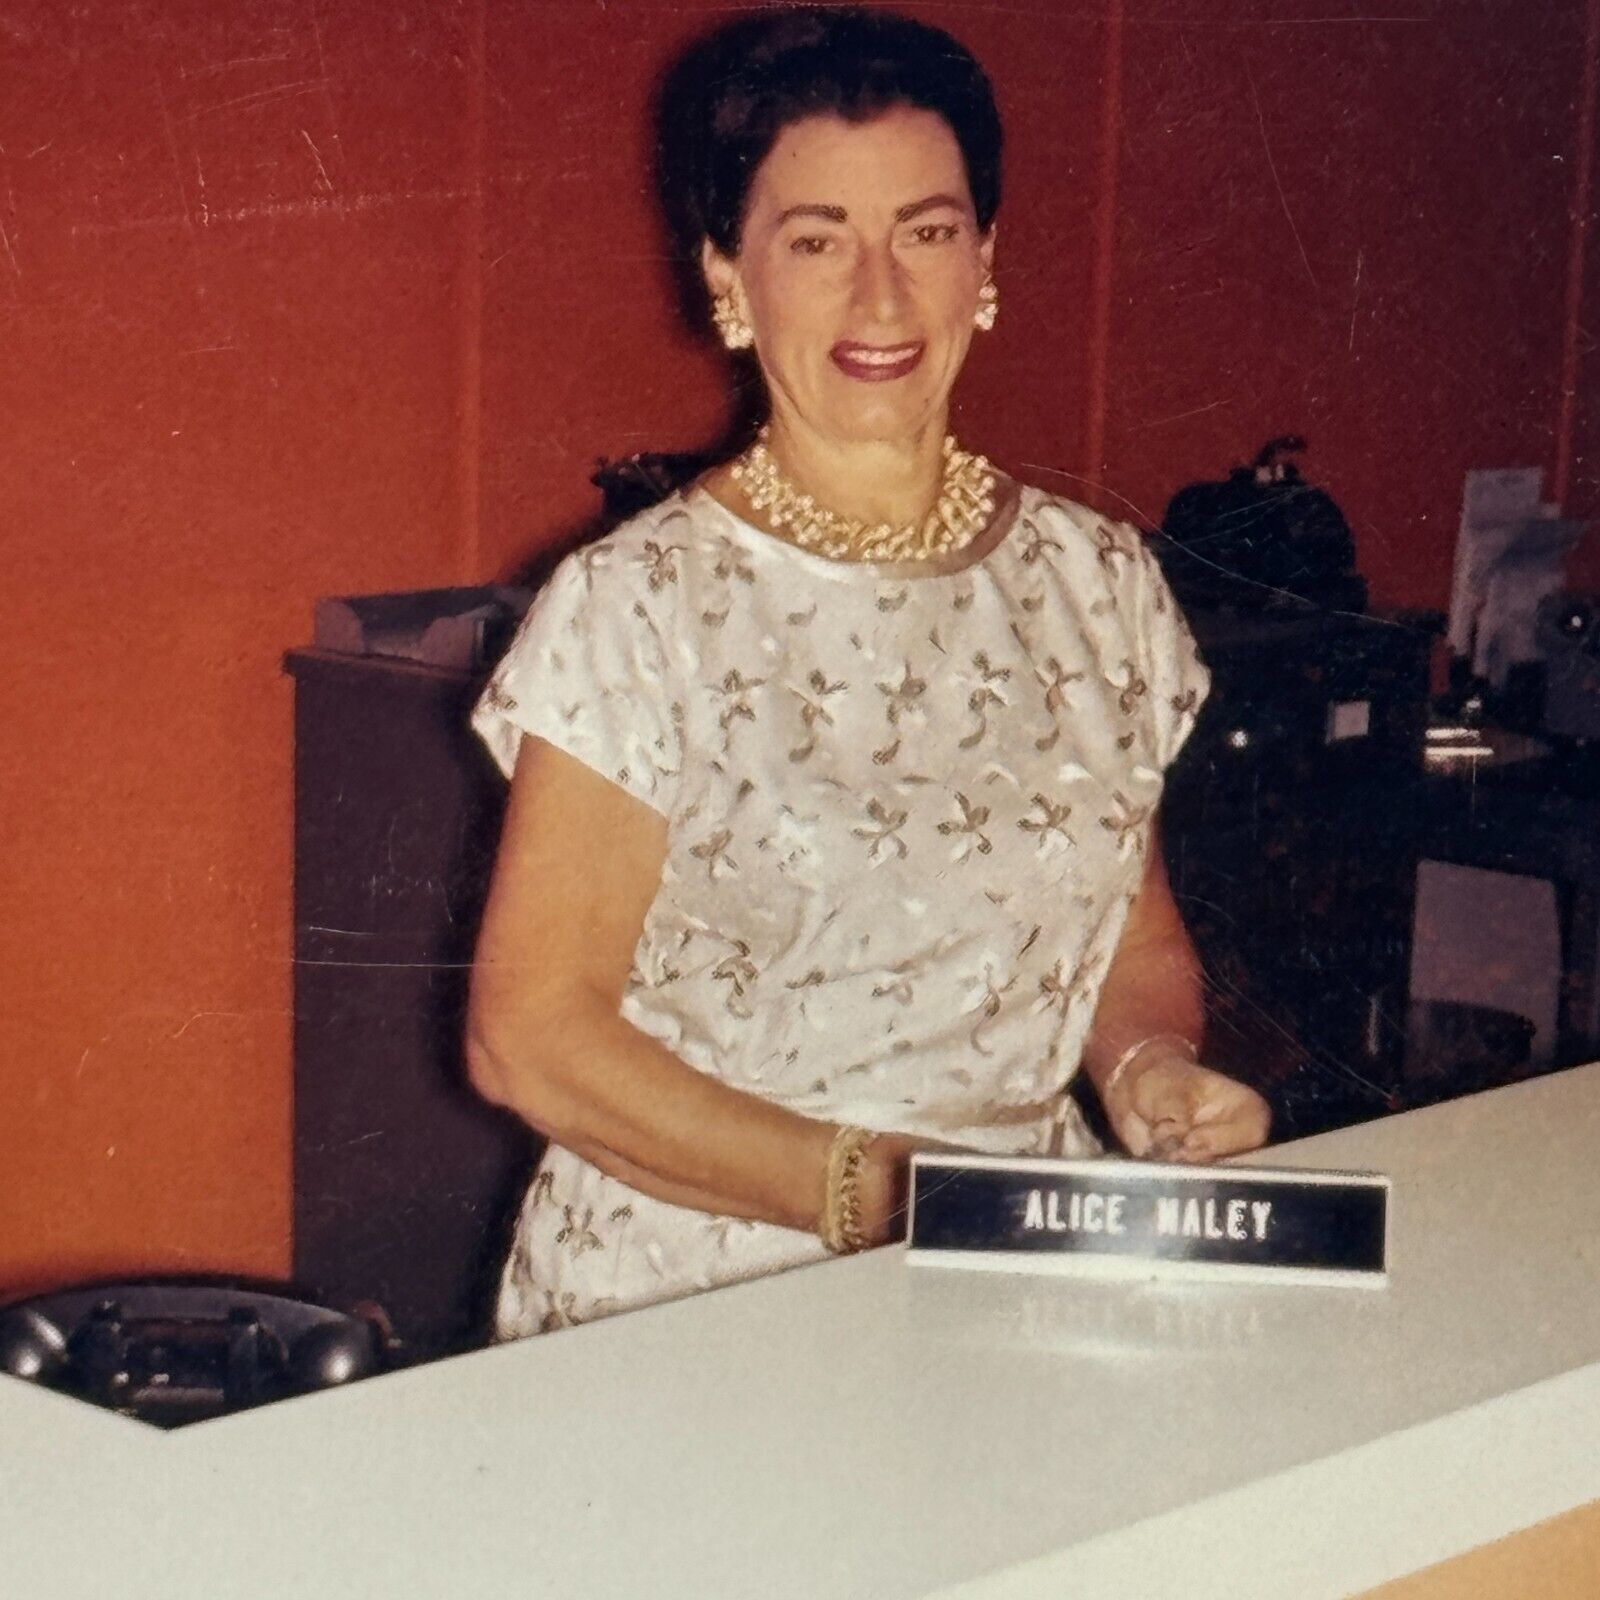 1T Photograph Lovely Woman At Work Desk Name Plate 1962 Pretty Secretary 